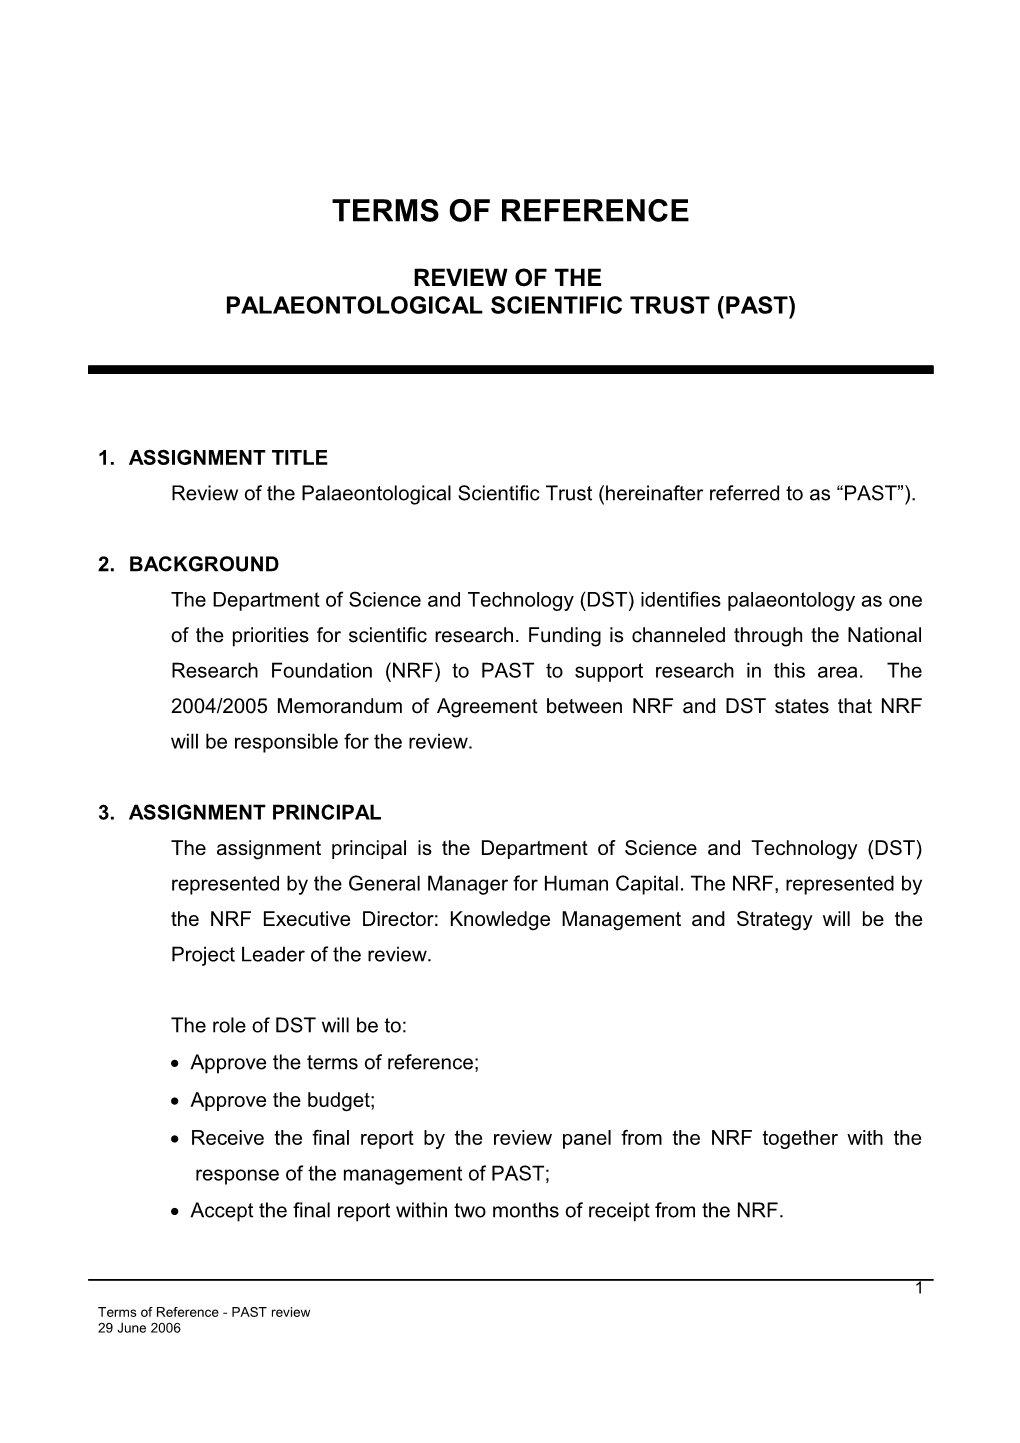 Review of the Palaeontological Scientific Trust (Hereinafter Referred to As PAST )